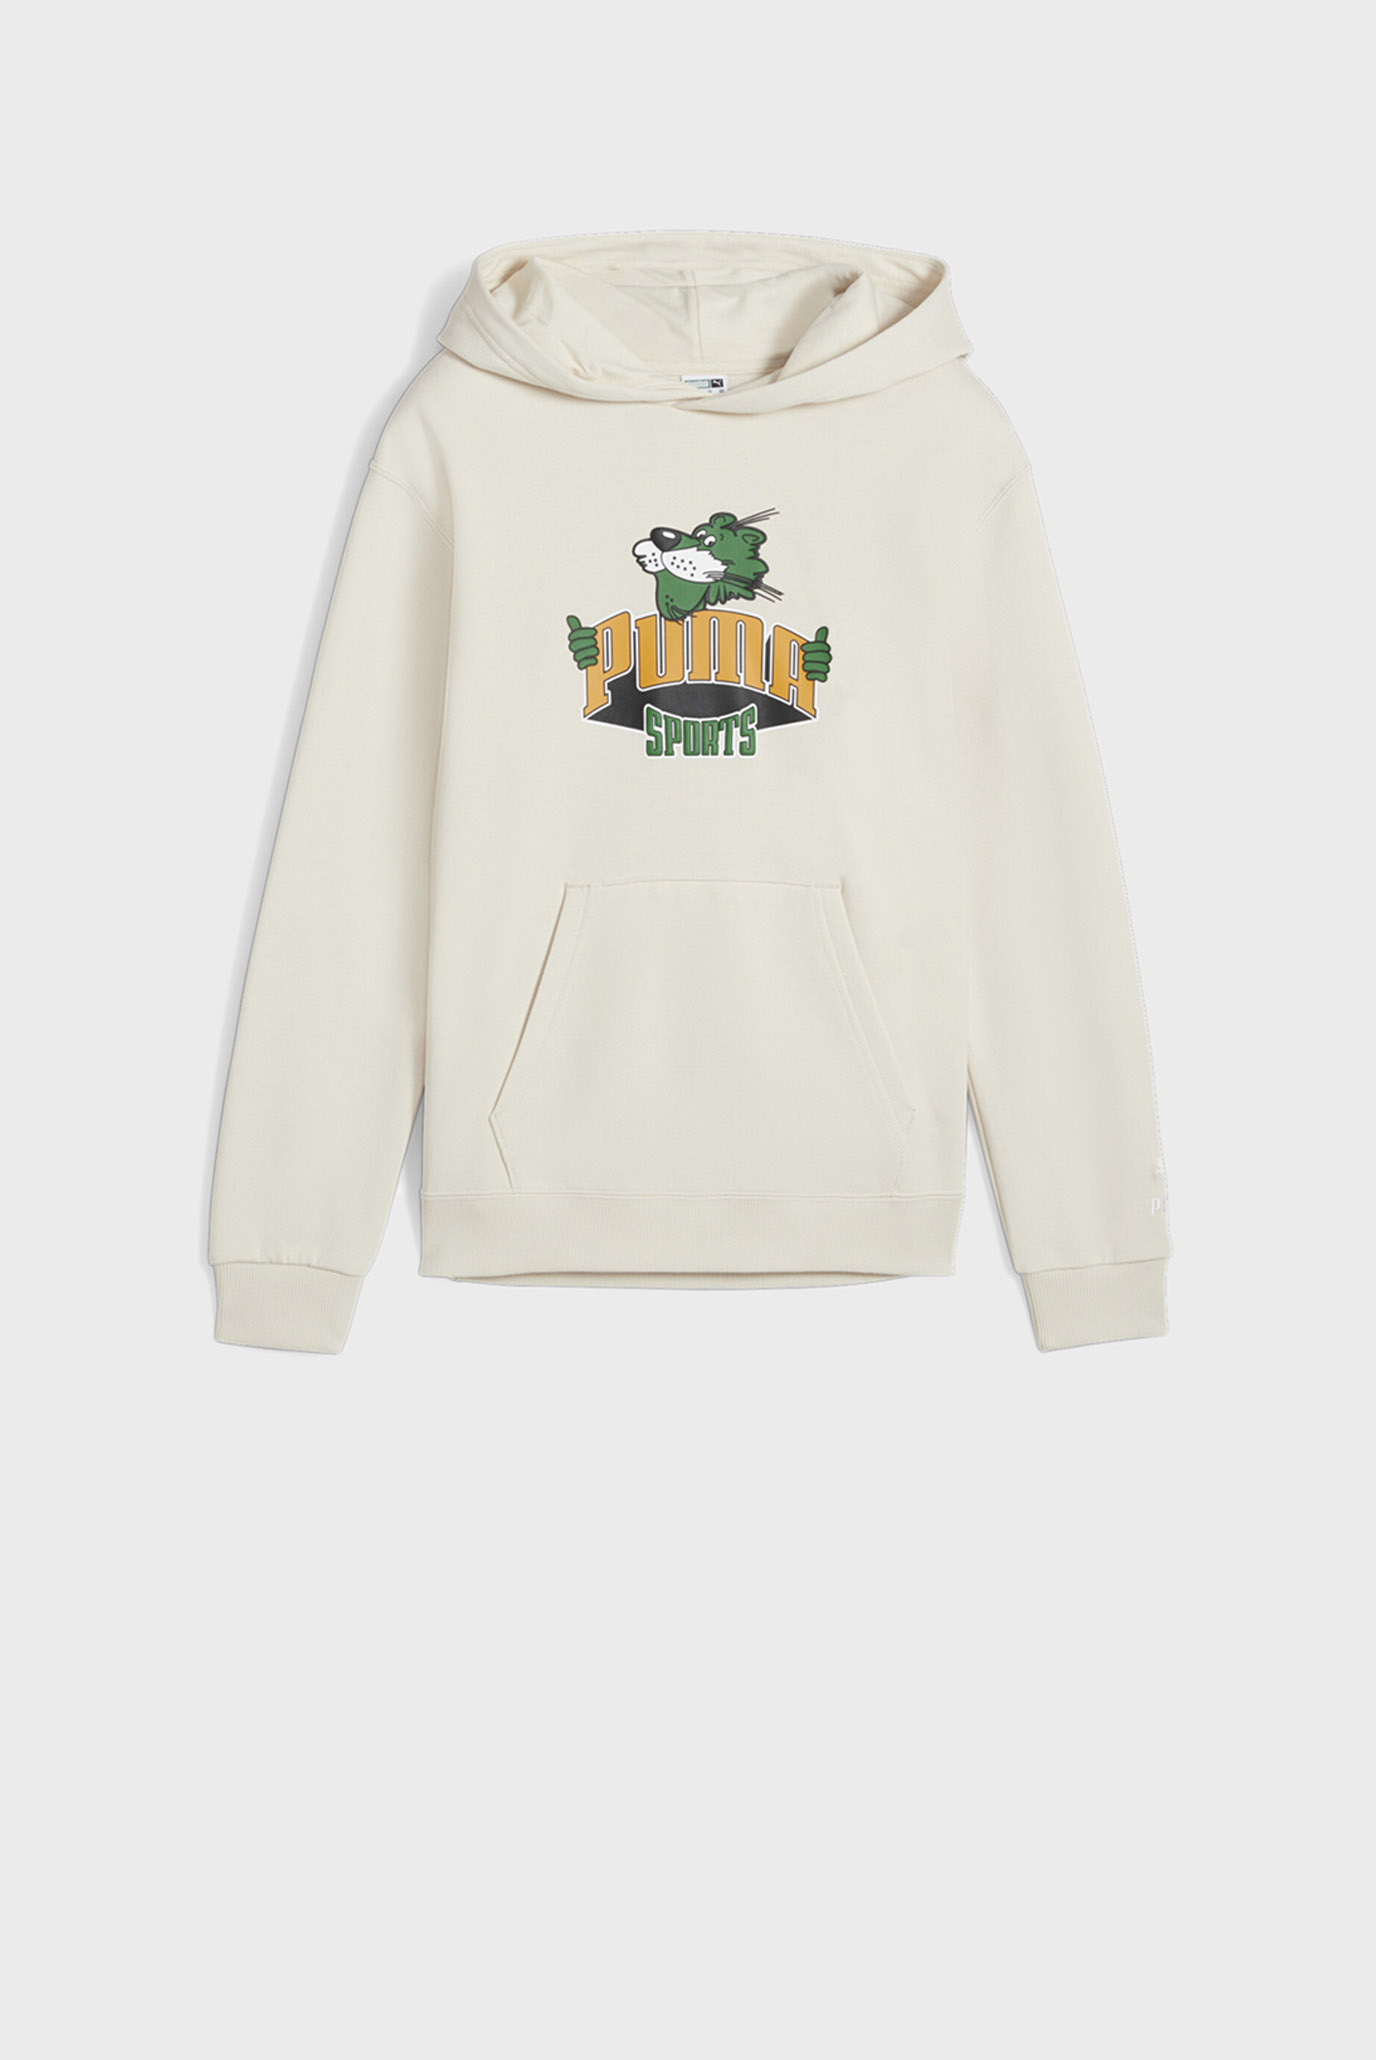 Дитяче біле худі FOR THE FANBASE Youth Hoodie 1